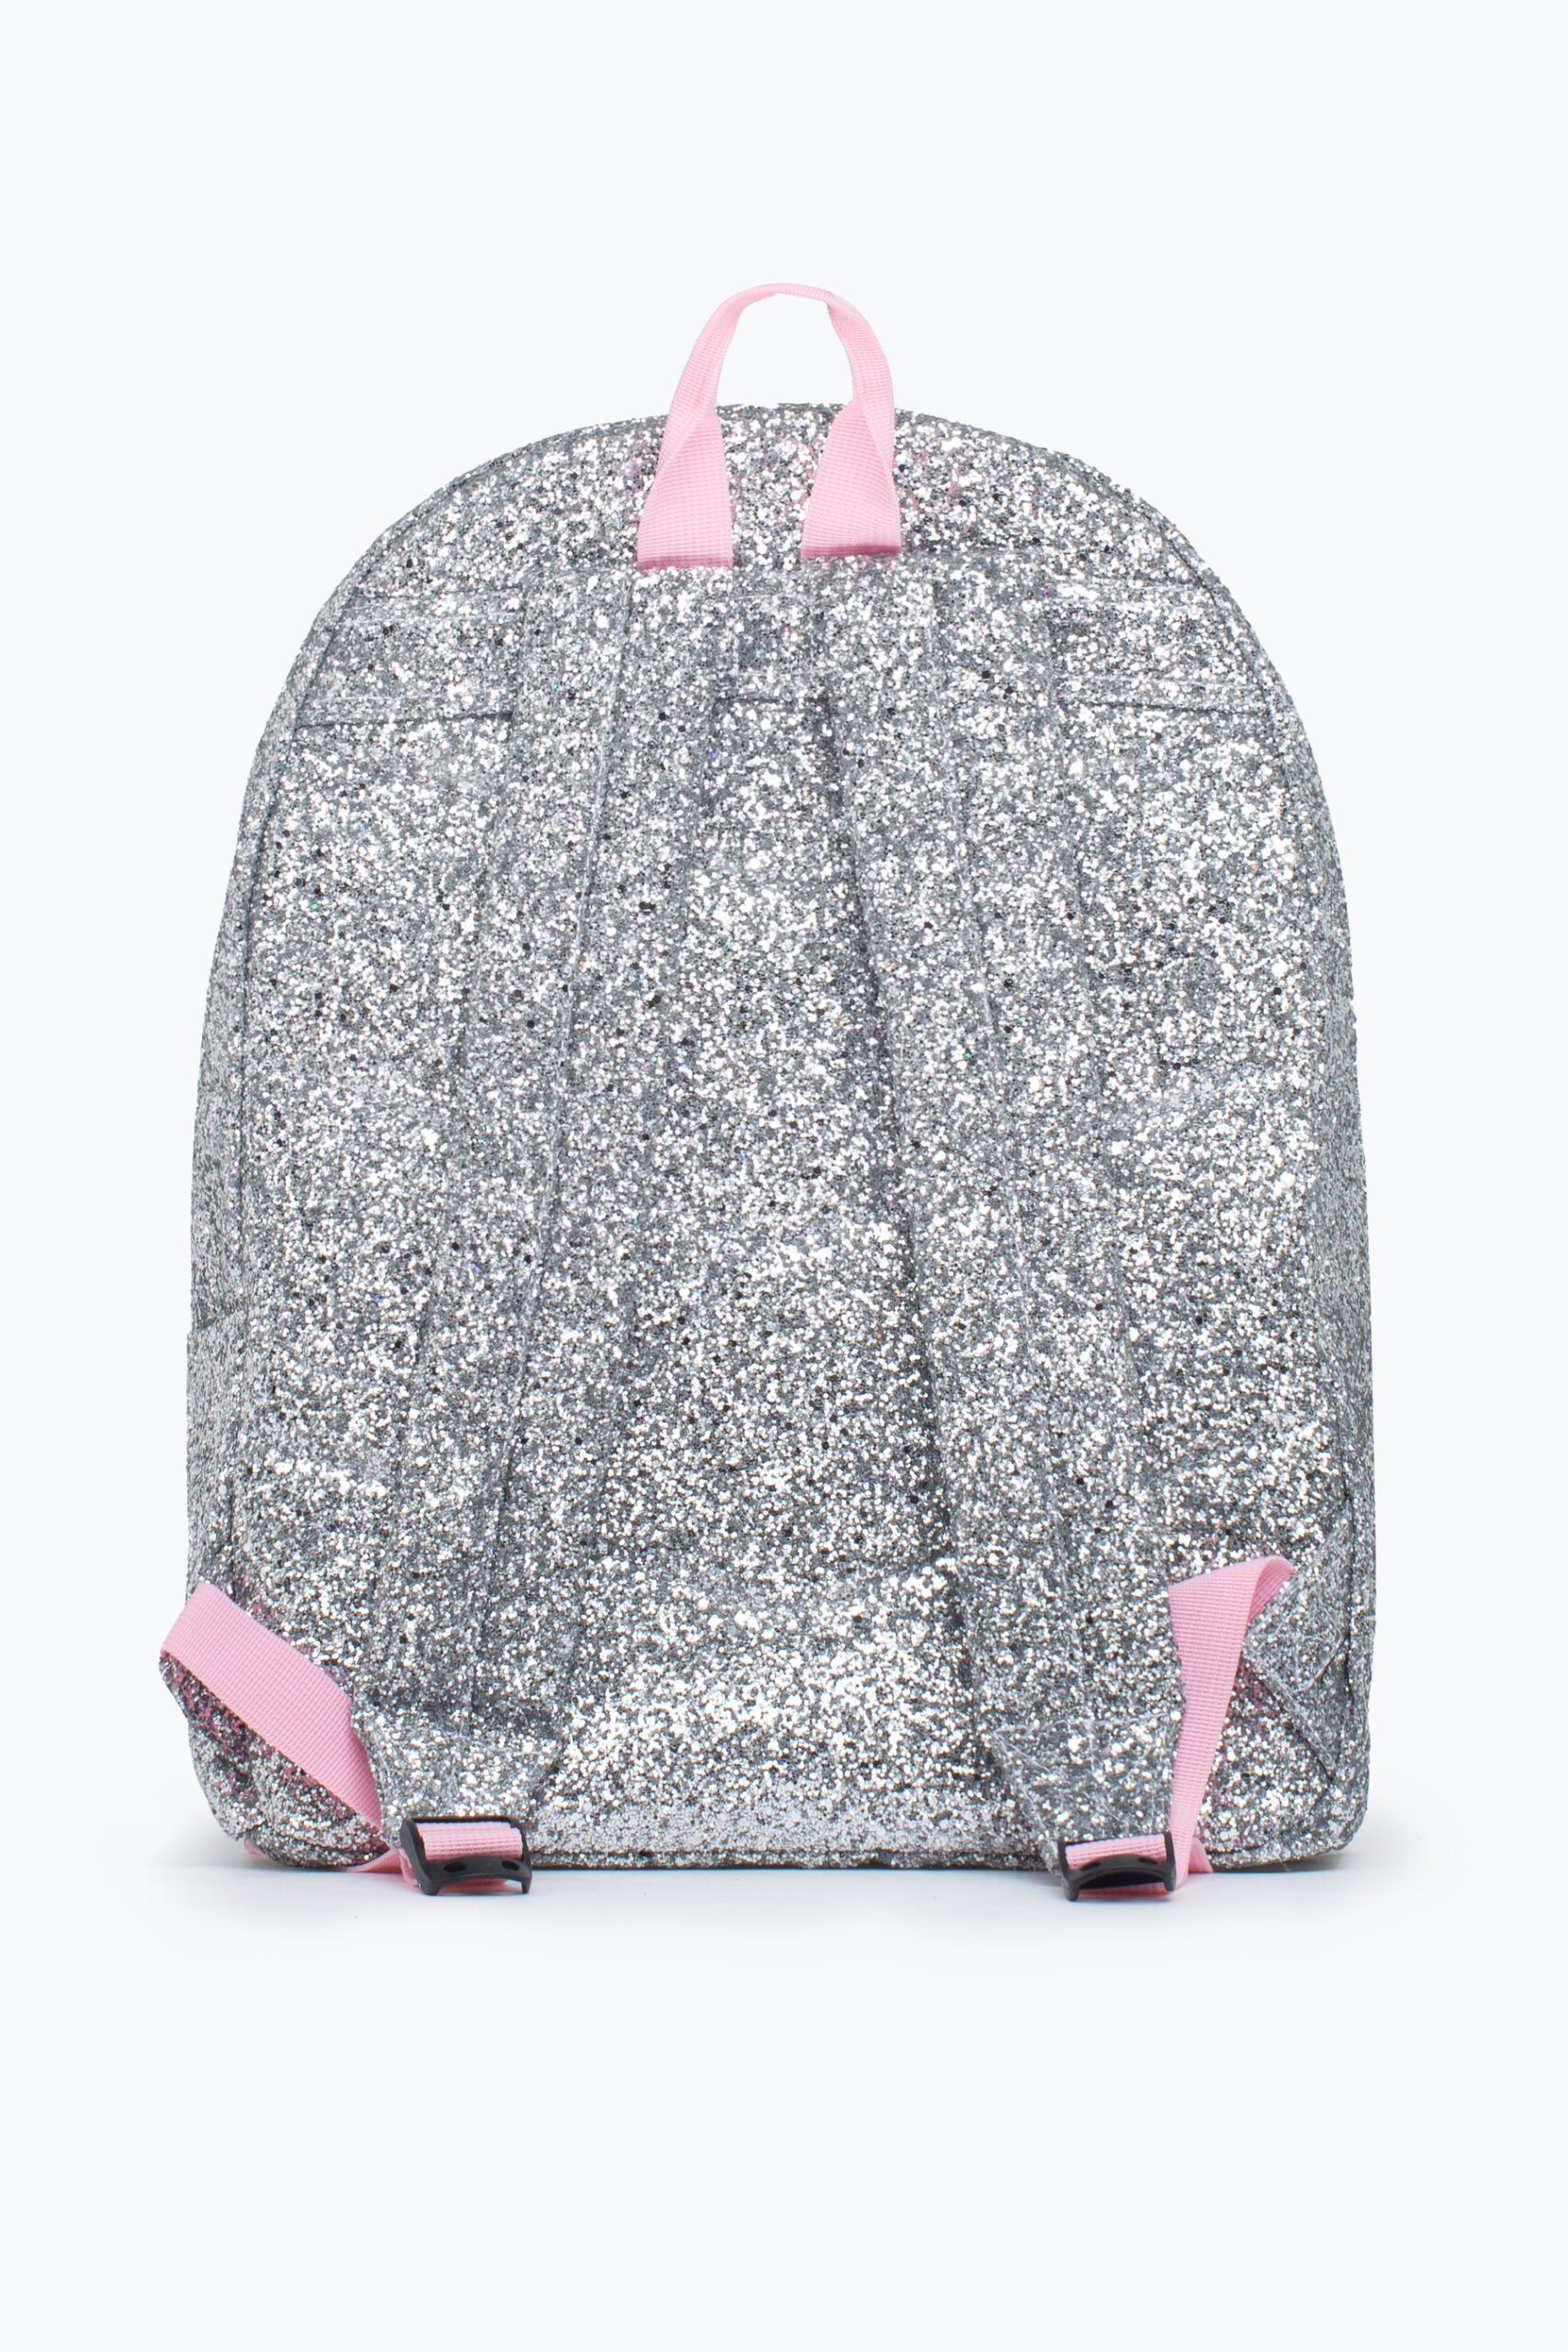 hype silver glitter backpack back view